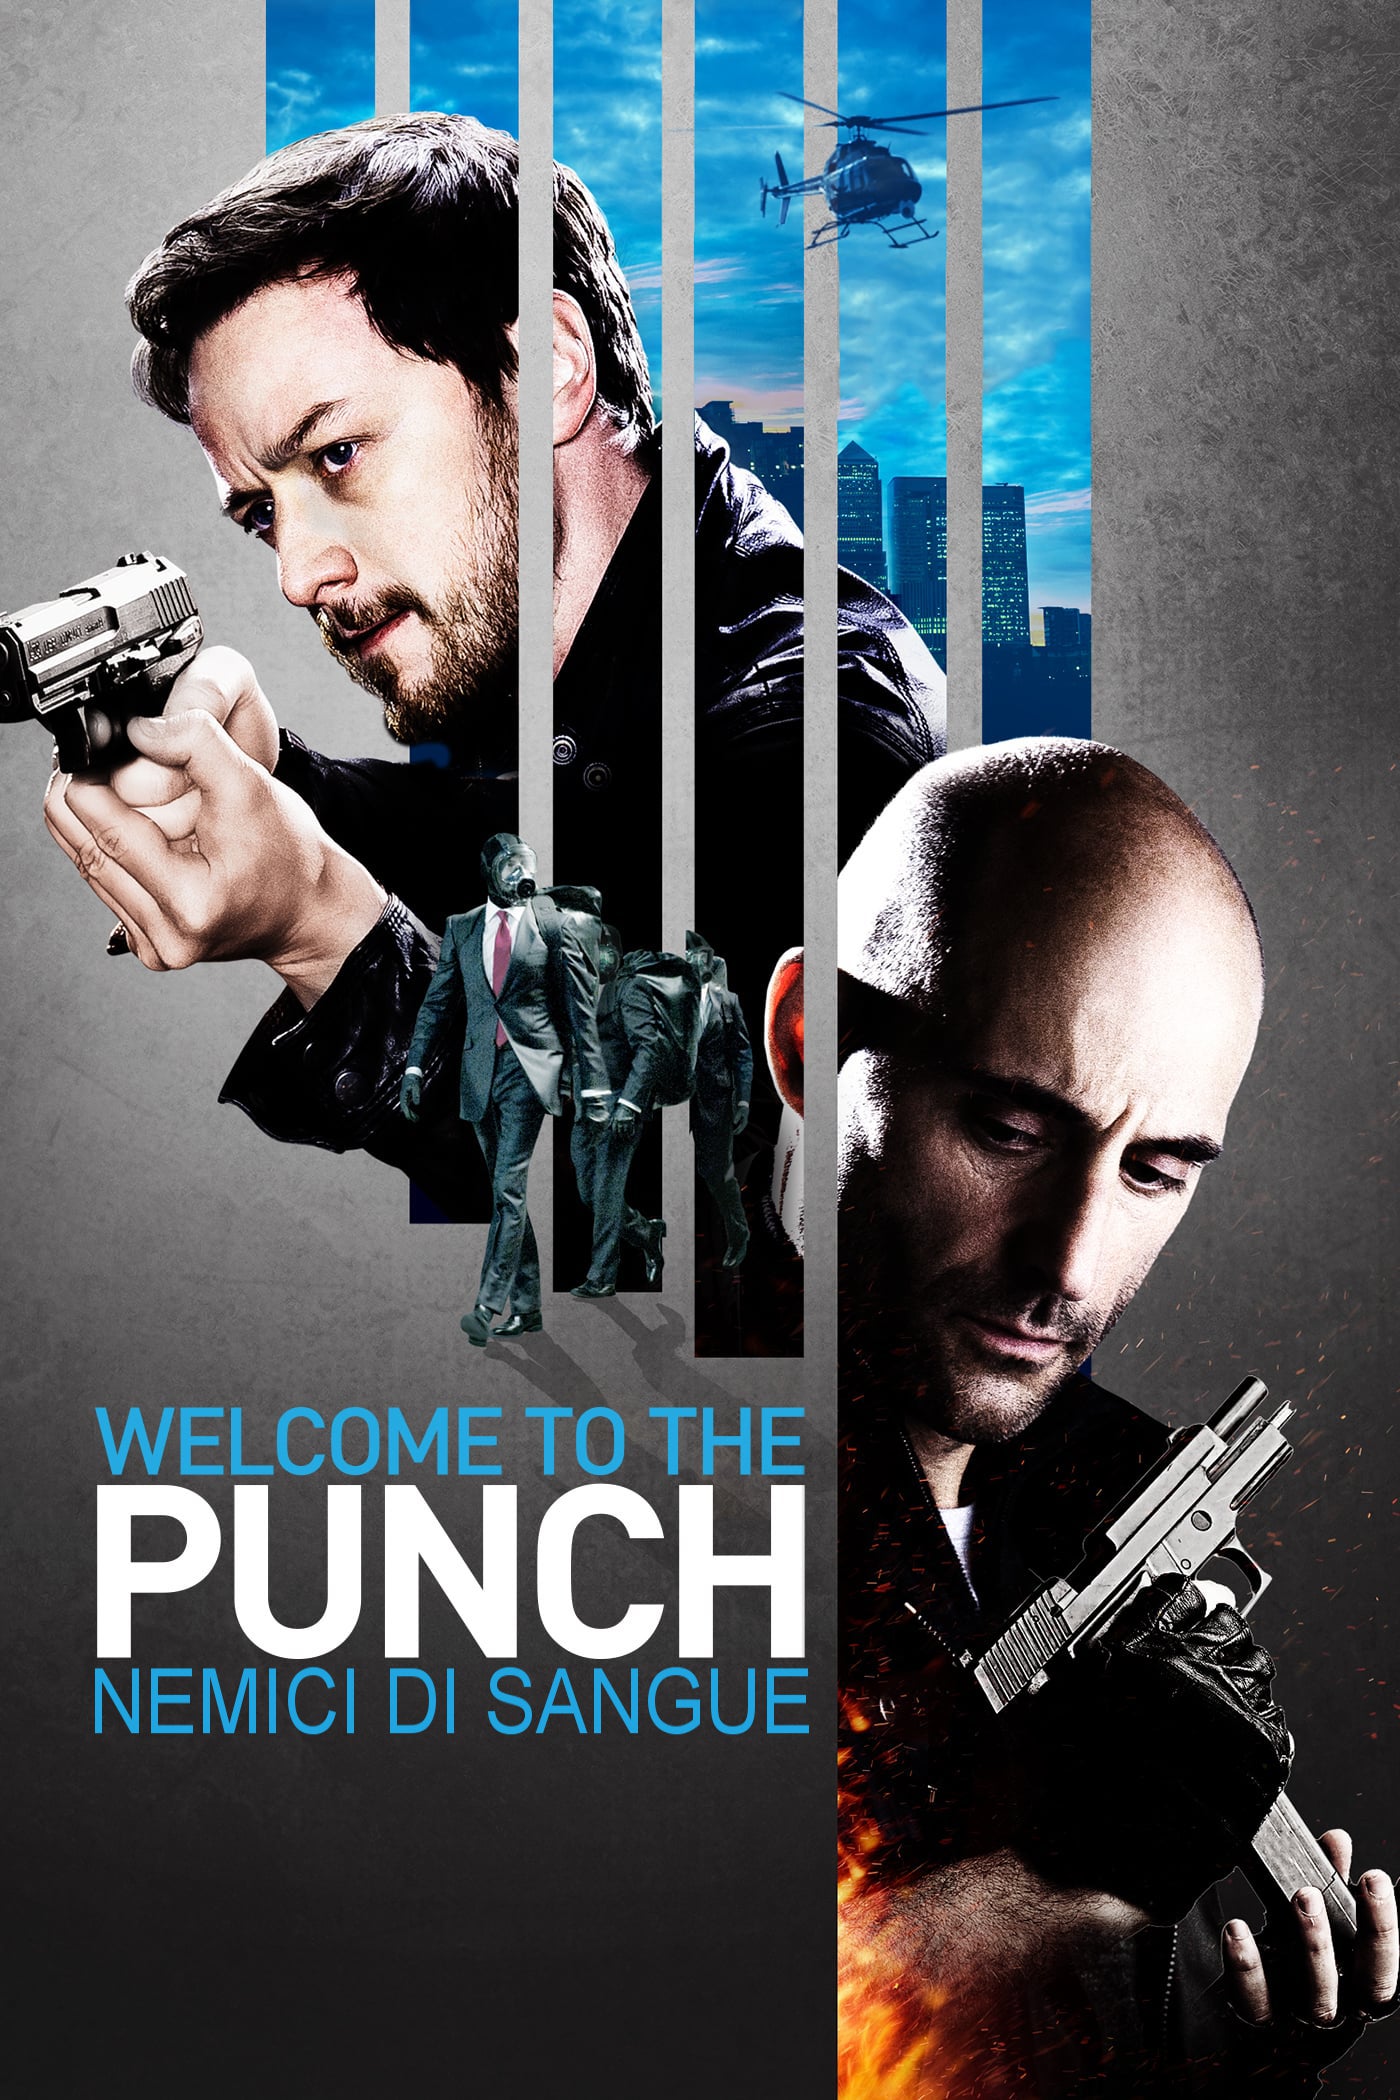 Welcome to the Punch – Nemici di sangue [HD] (2013)